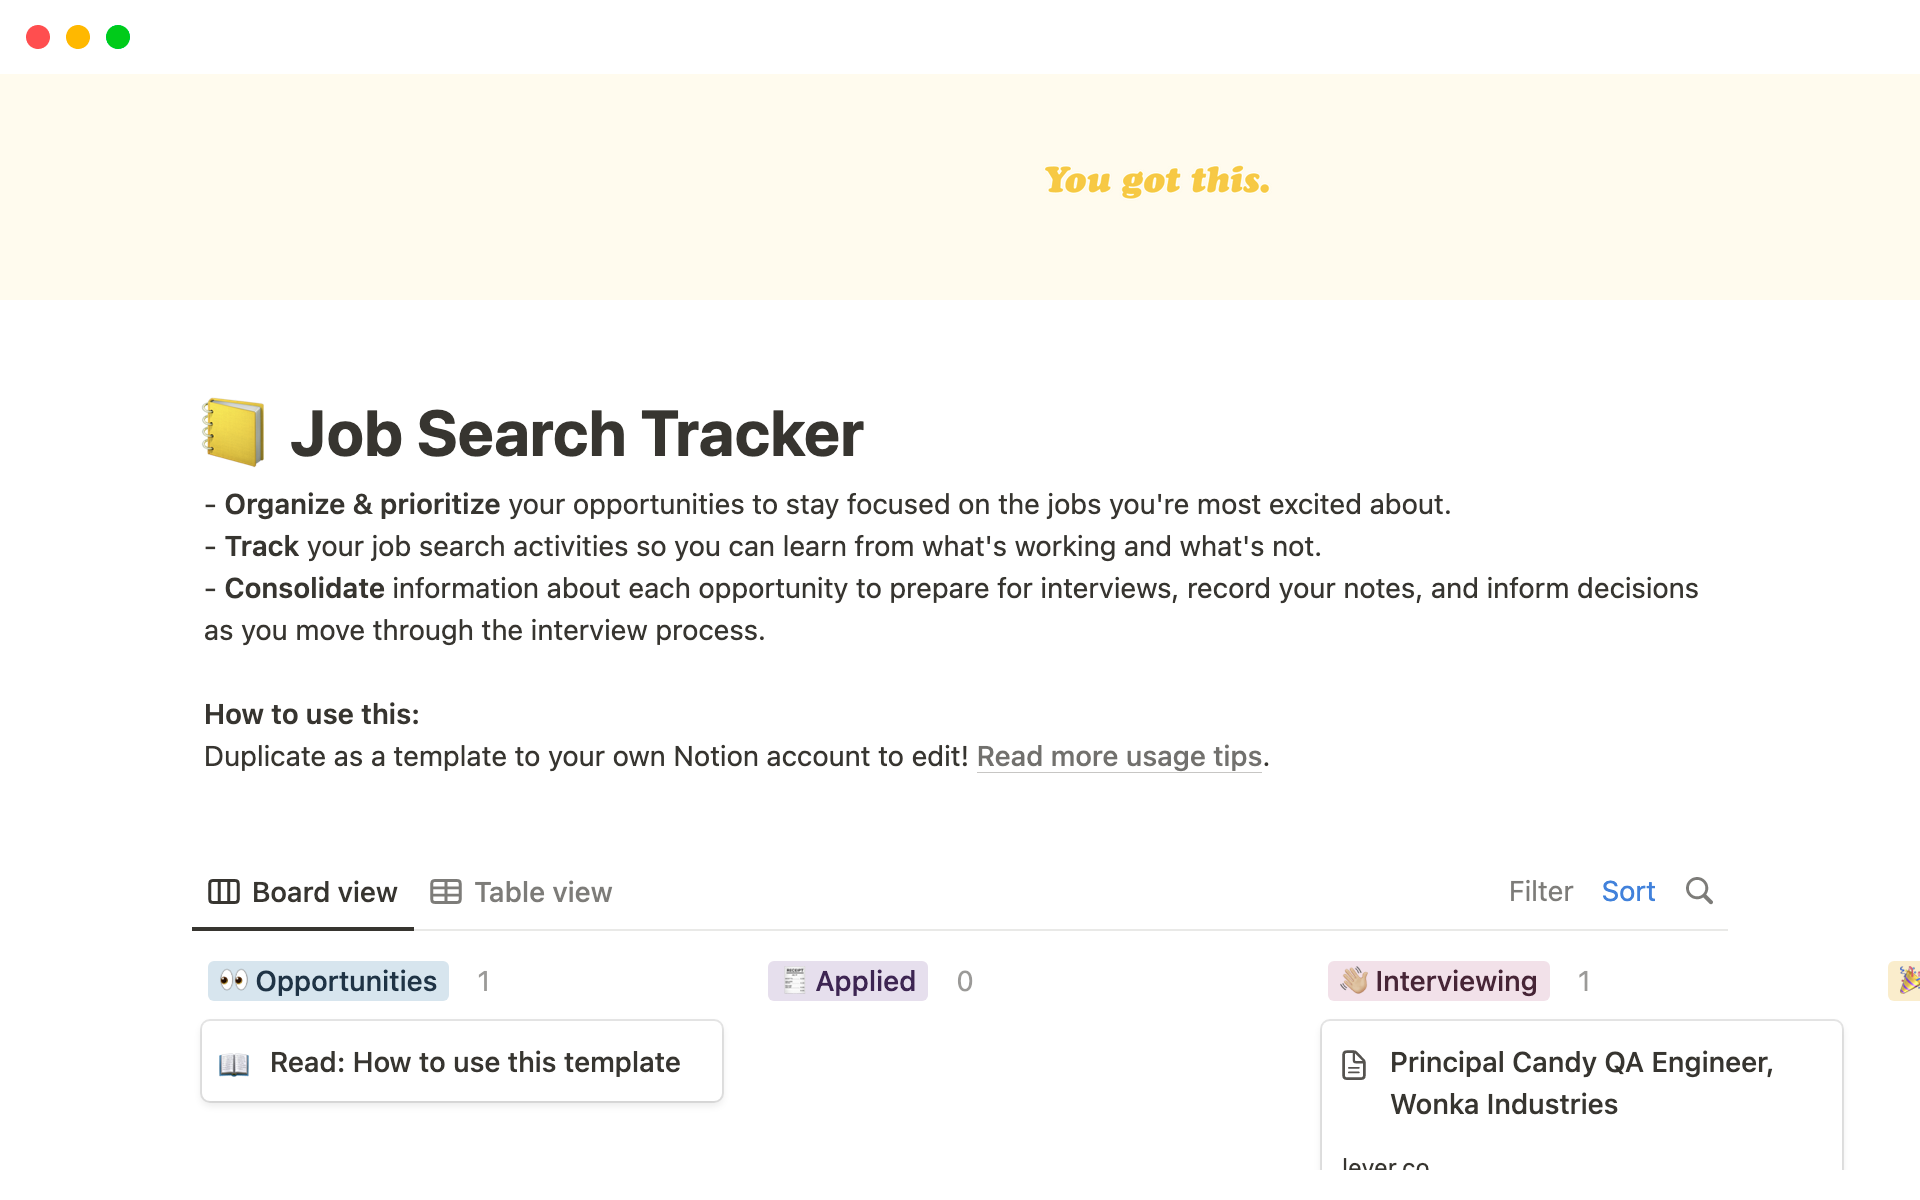 Organize, prioritize, and track your job search.